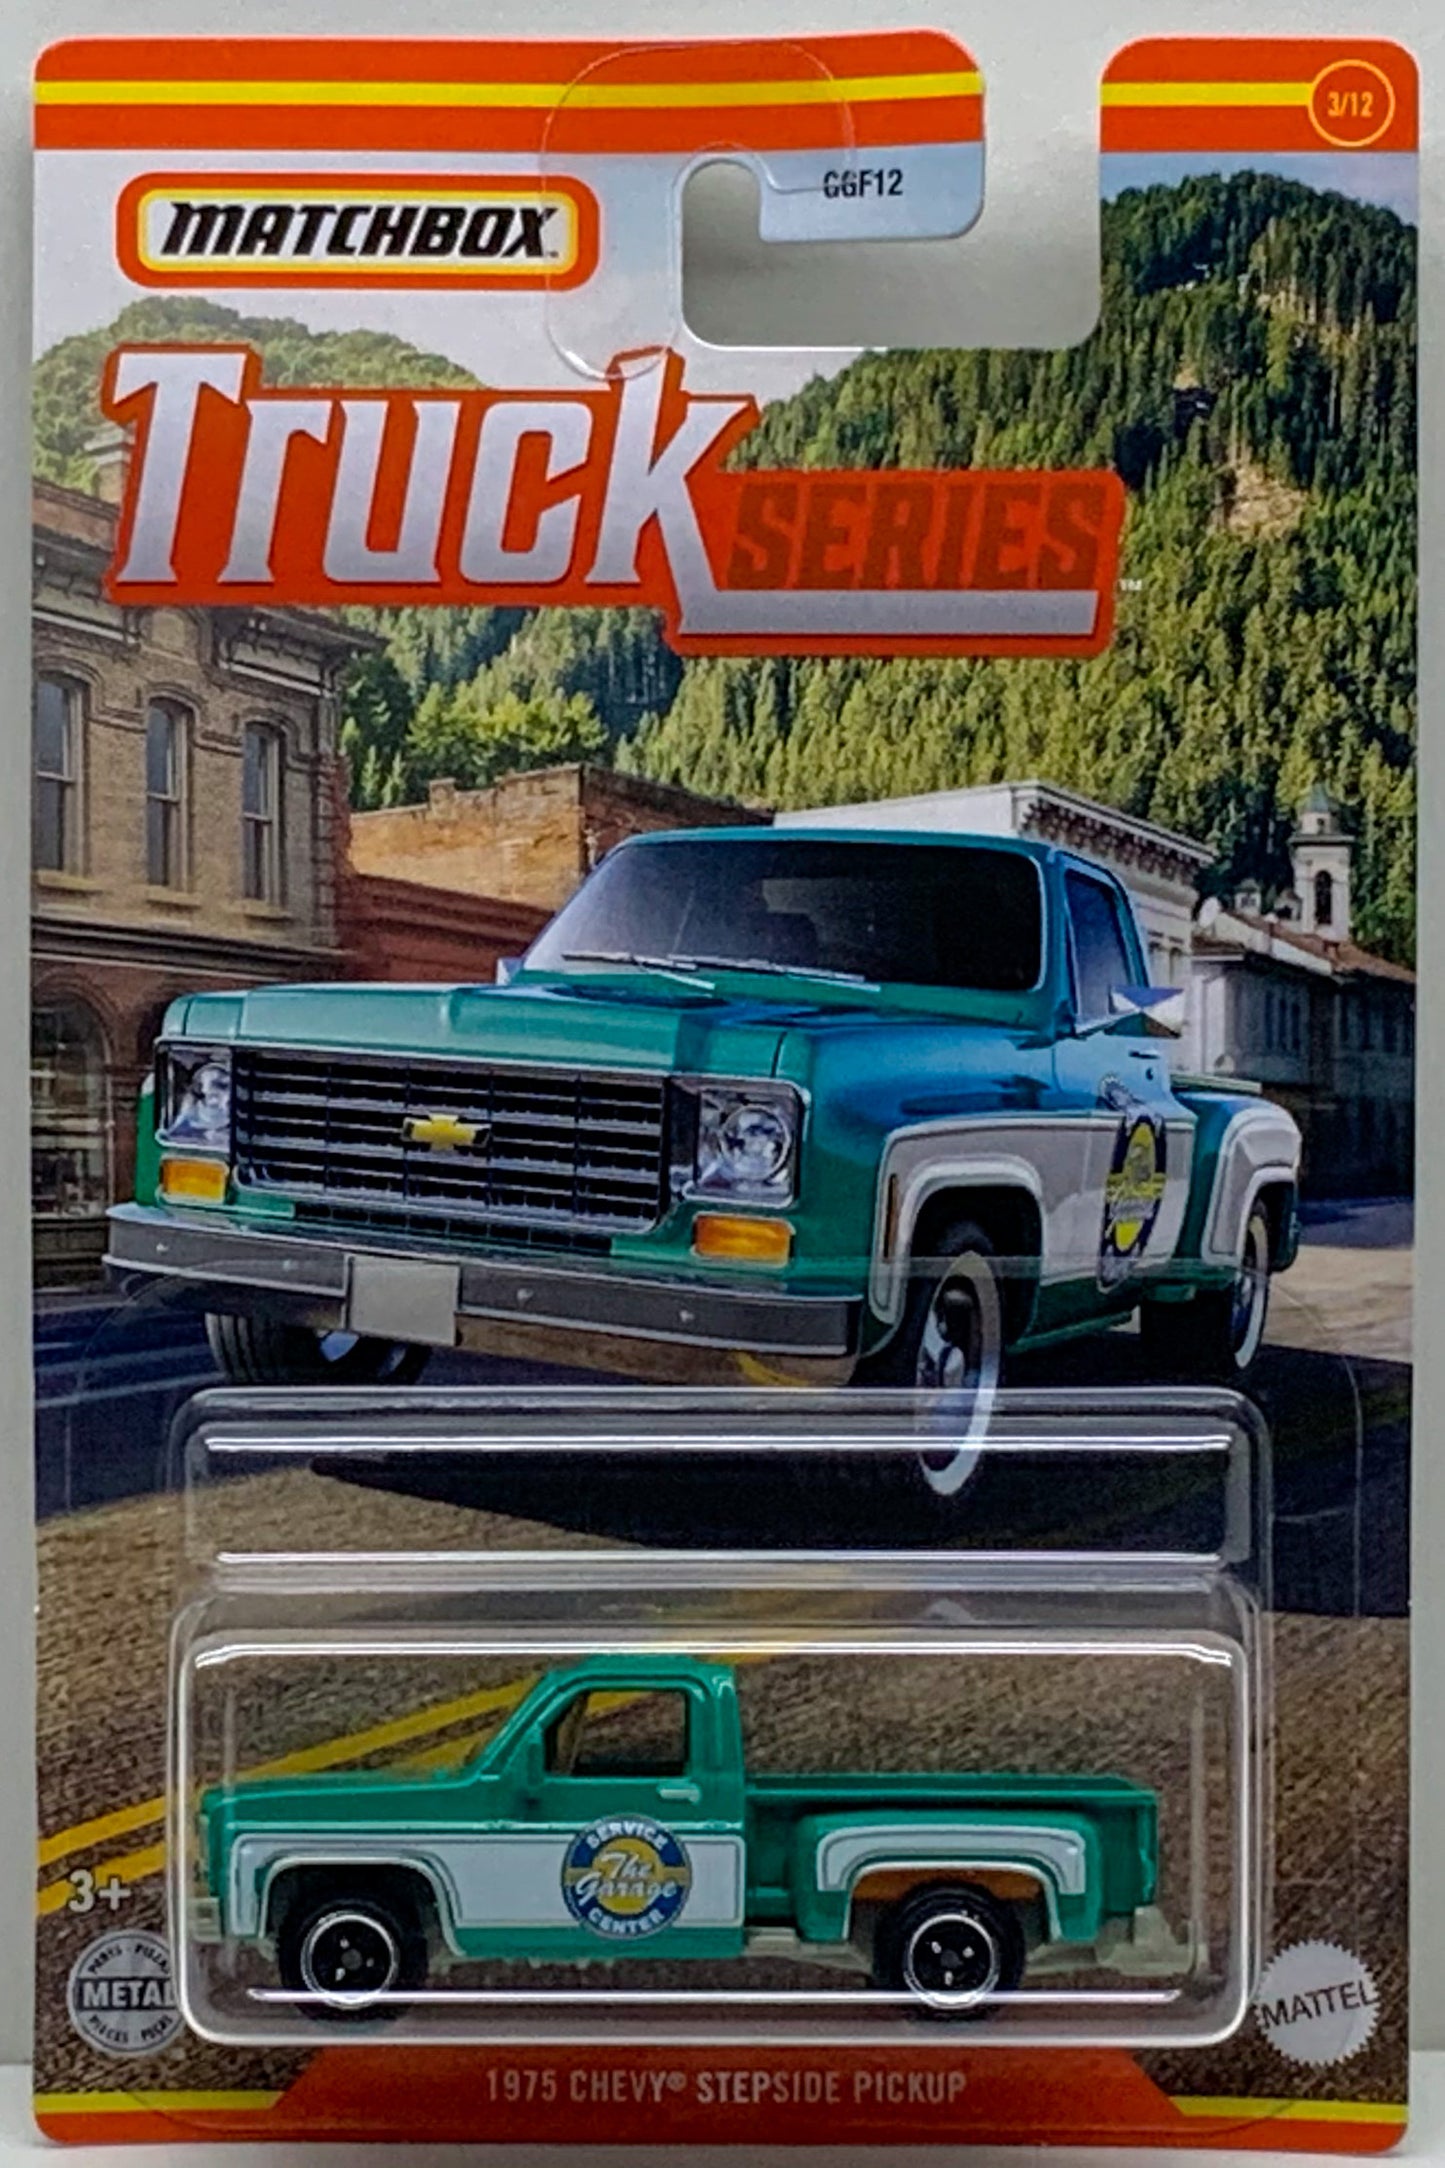 Buy at Tatoy Themed Matchbox Number 3 of 12 Truck Series 1975 Chevy Stepside Pickup Metal Mattel GGF12